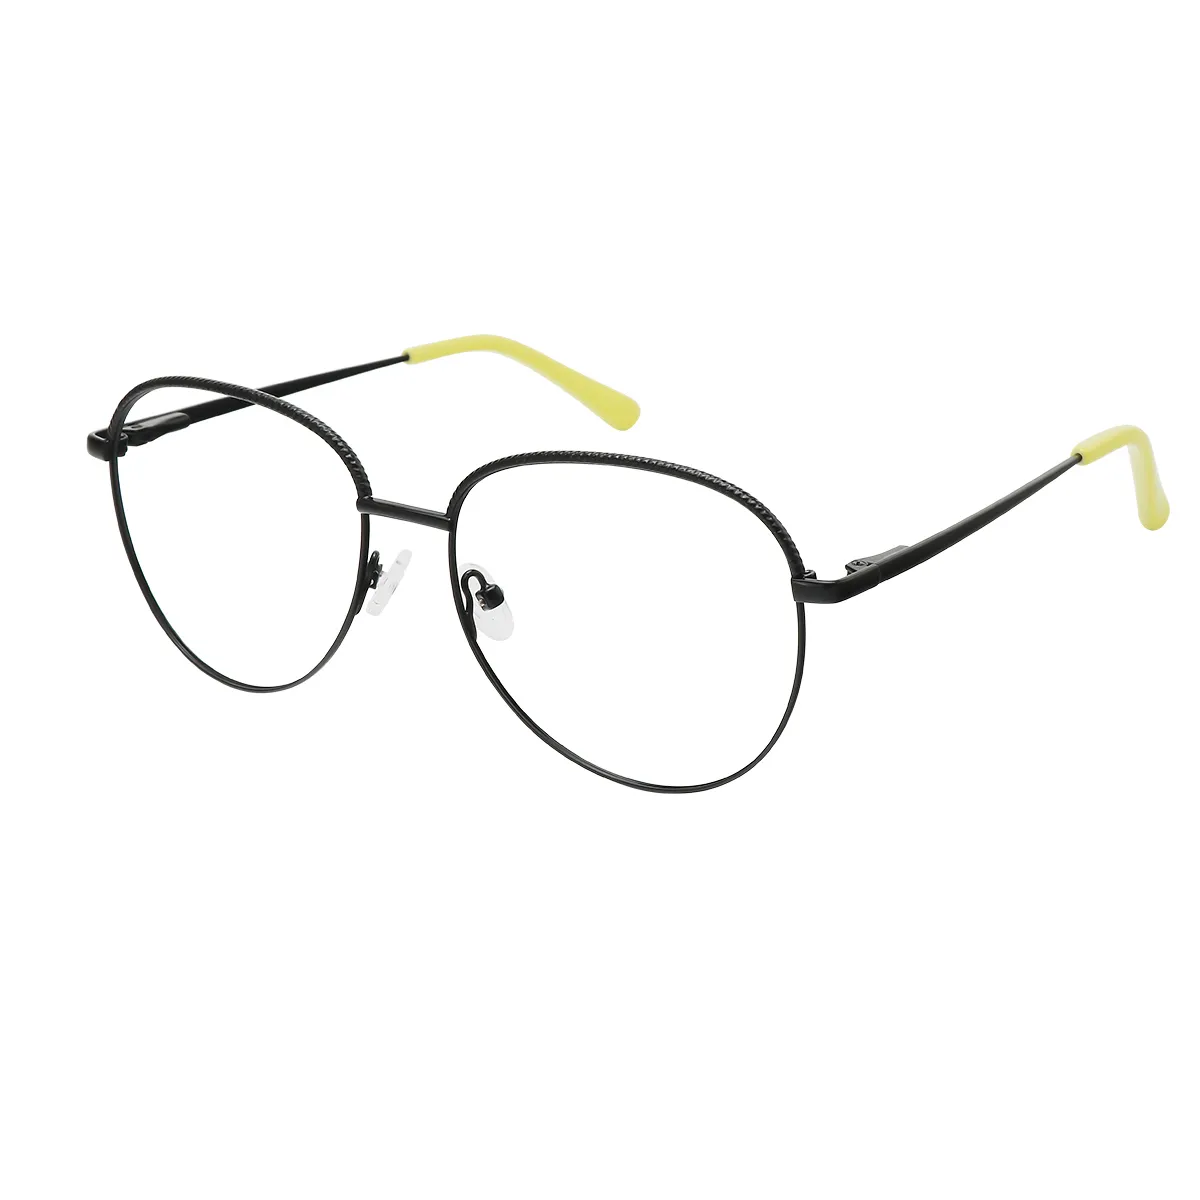 Carin - Round Black/Yellow Glasses for Women